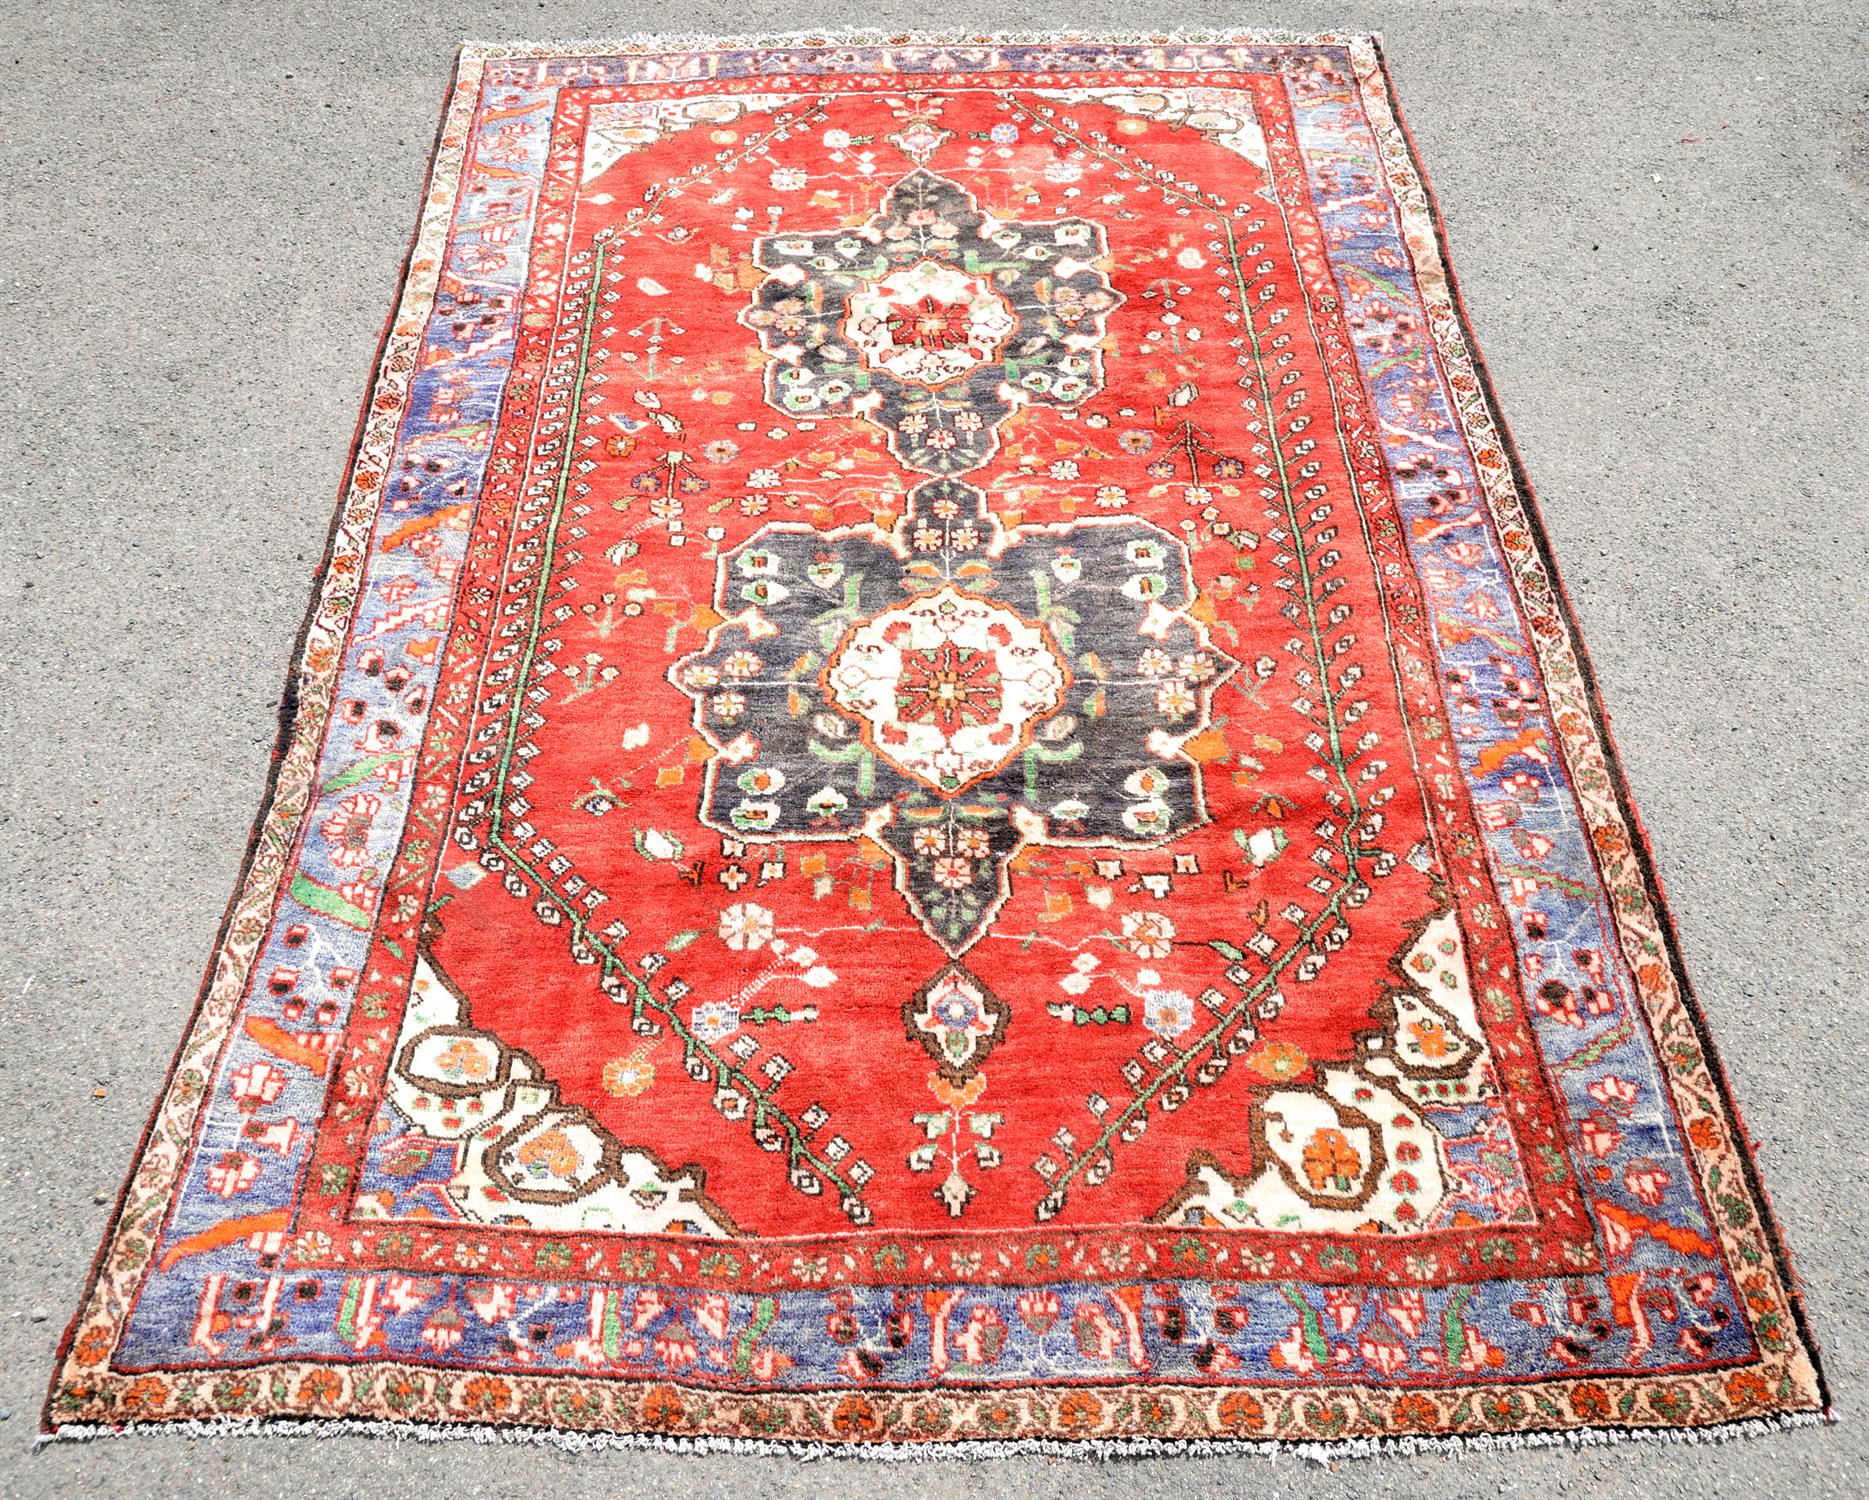 Persian Shiraz village carpet, with twin floral medallions on red ground with vine leaf and floral